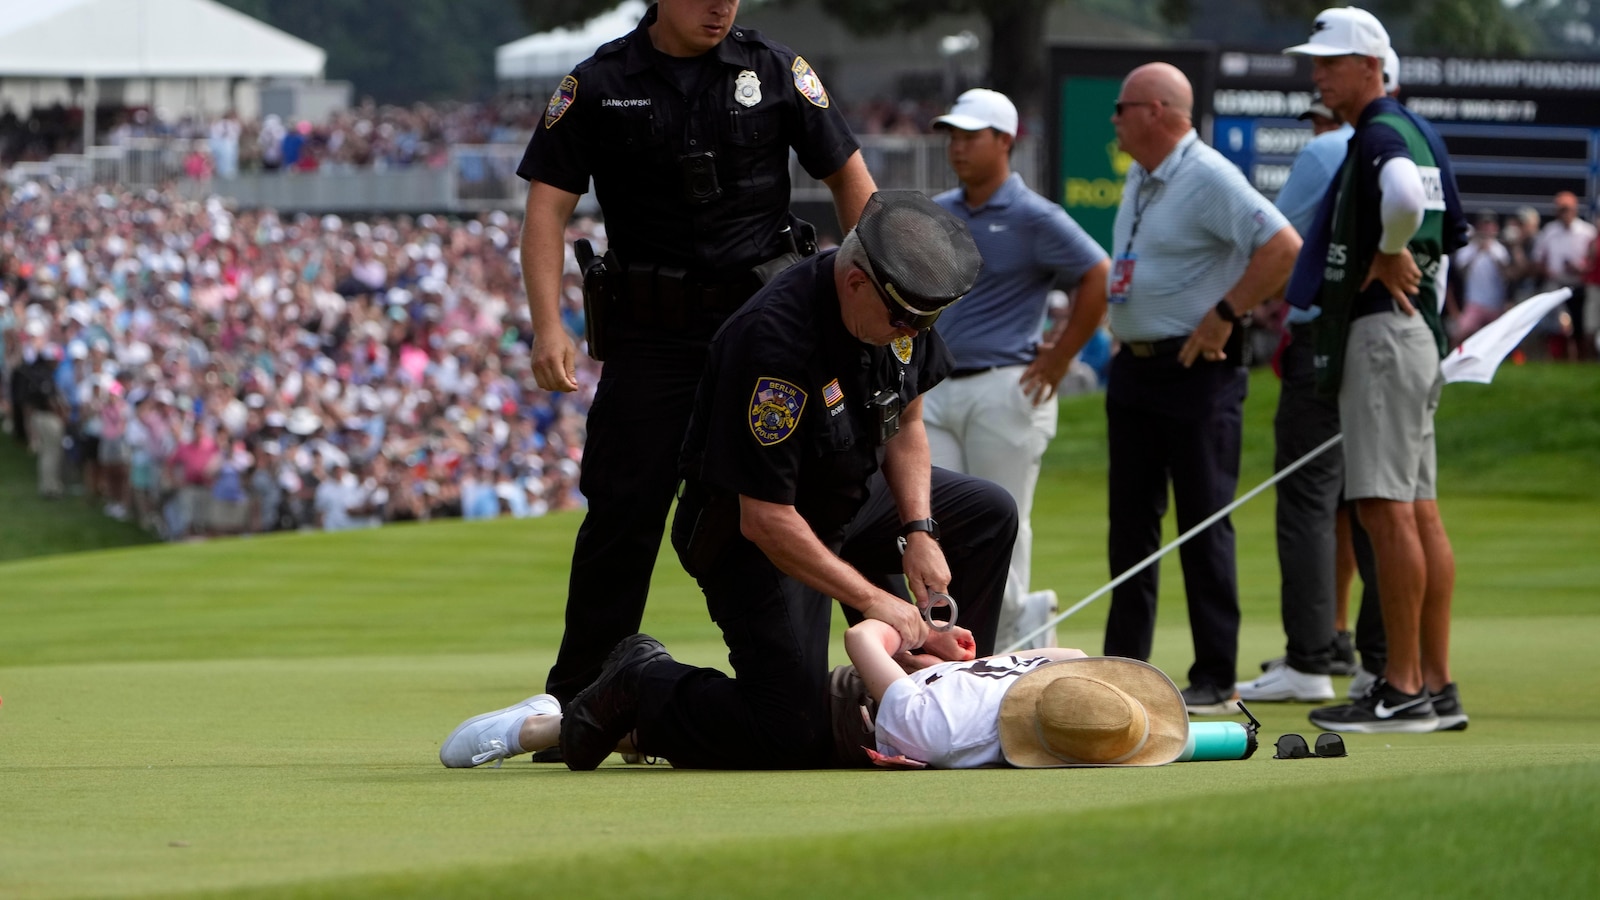 Climate protesters disrupt PGA Tour event by running onto 18th green and spraying powder, causing delay